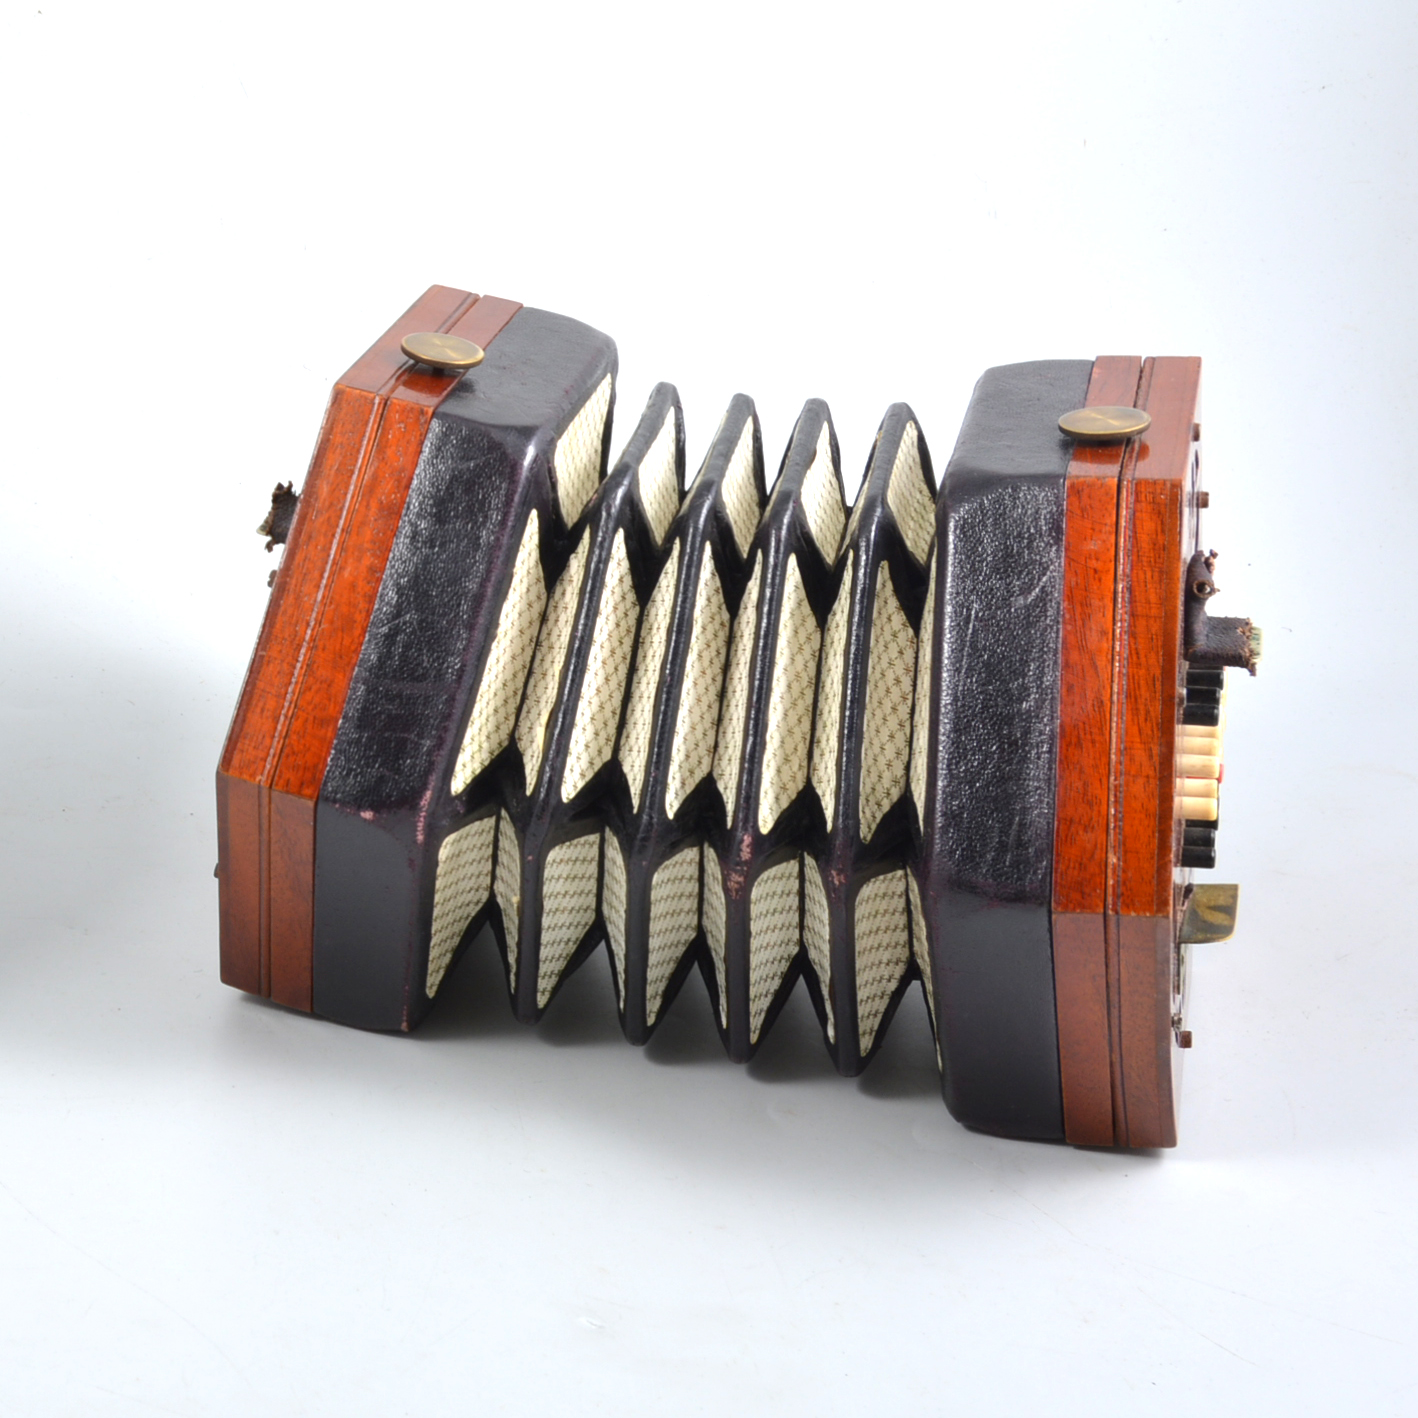 A Lachanel & Co Patent Concertina the hexagonal fret-cut stained wood ends with forty-eight buttons